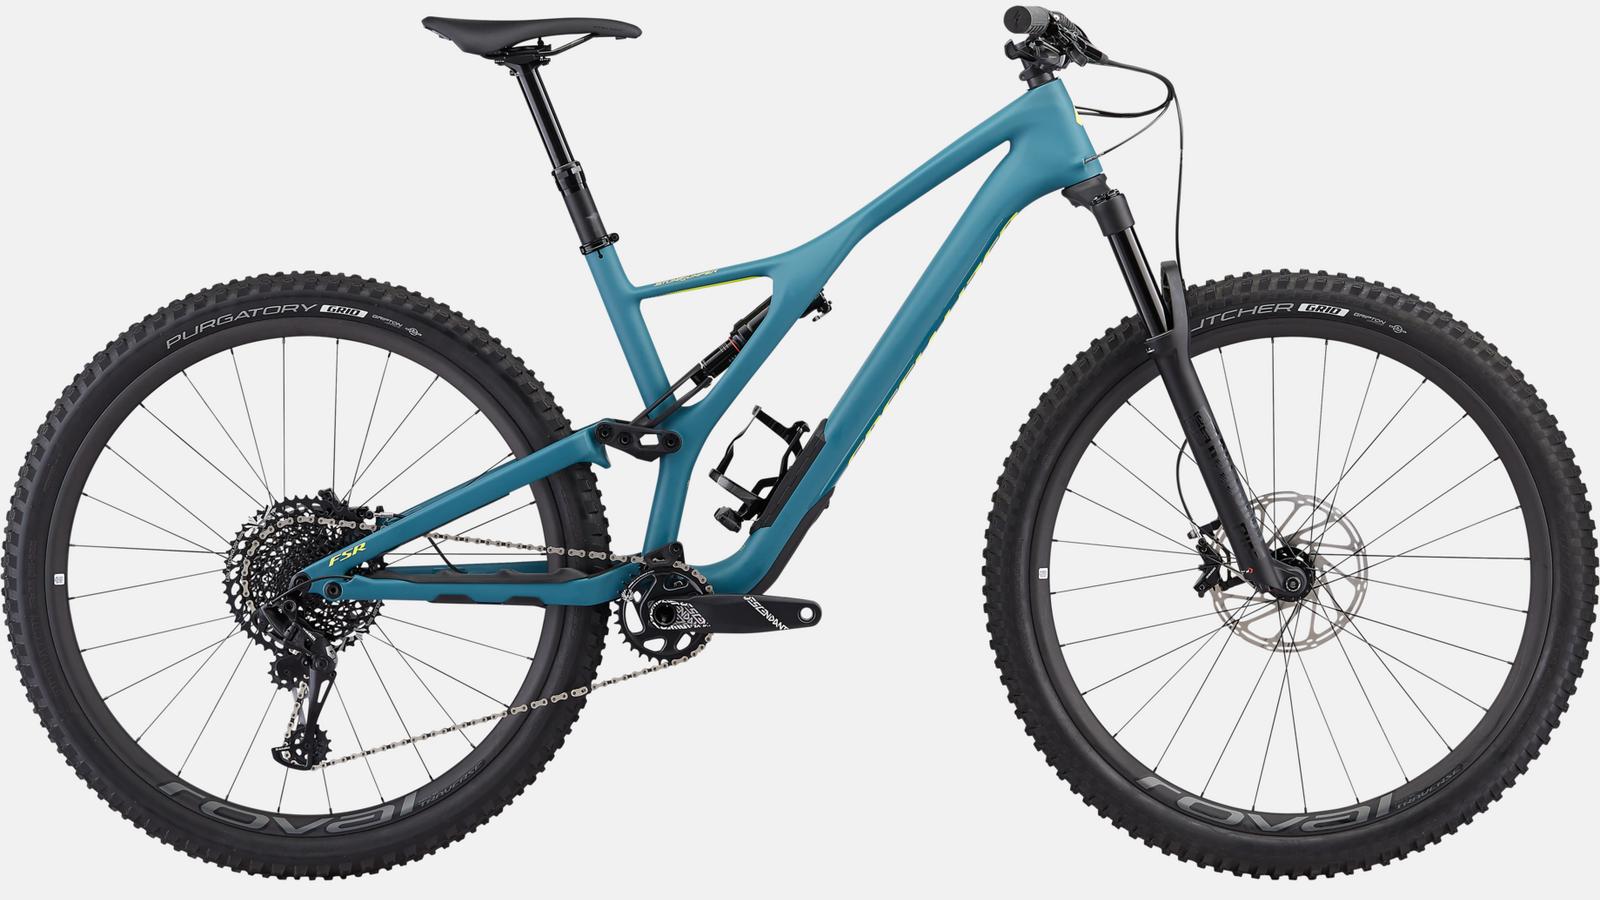 Paint for 2018 Specialized Men's Stumpjumper ST Expert 29 - Satin Dusty Turquoise